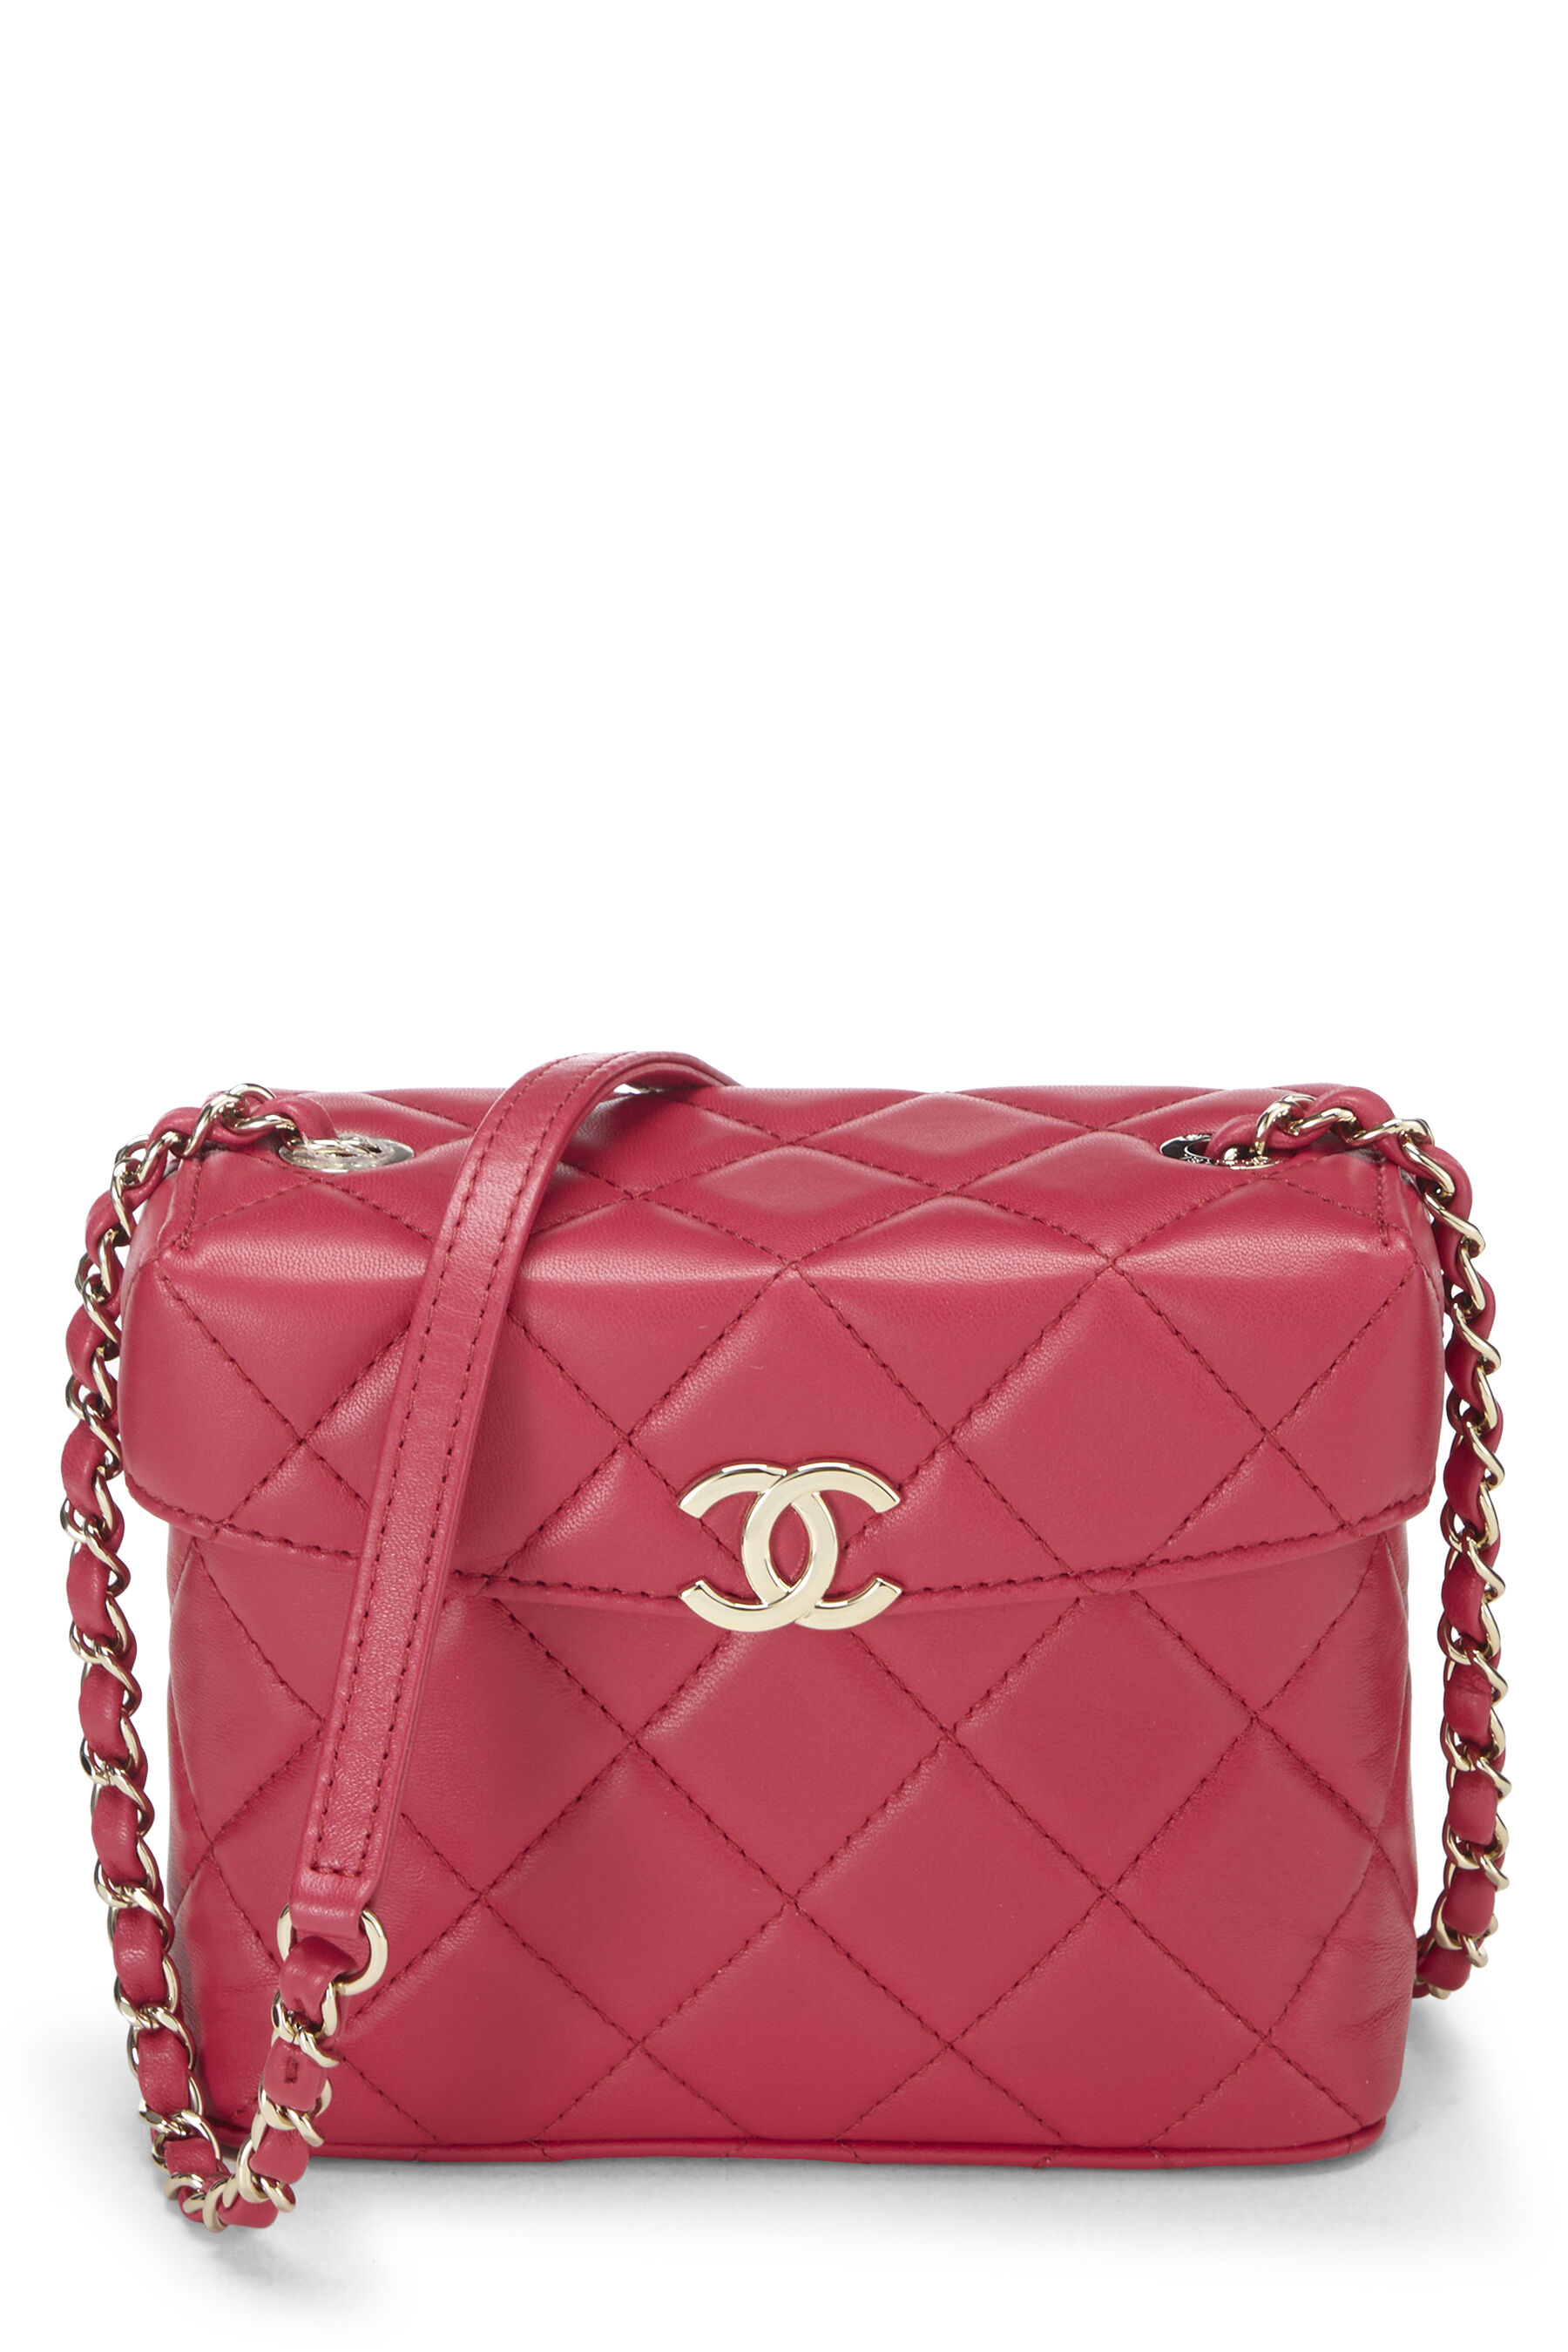 Chanel Quilted Lambskin Box Bag